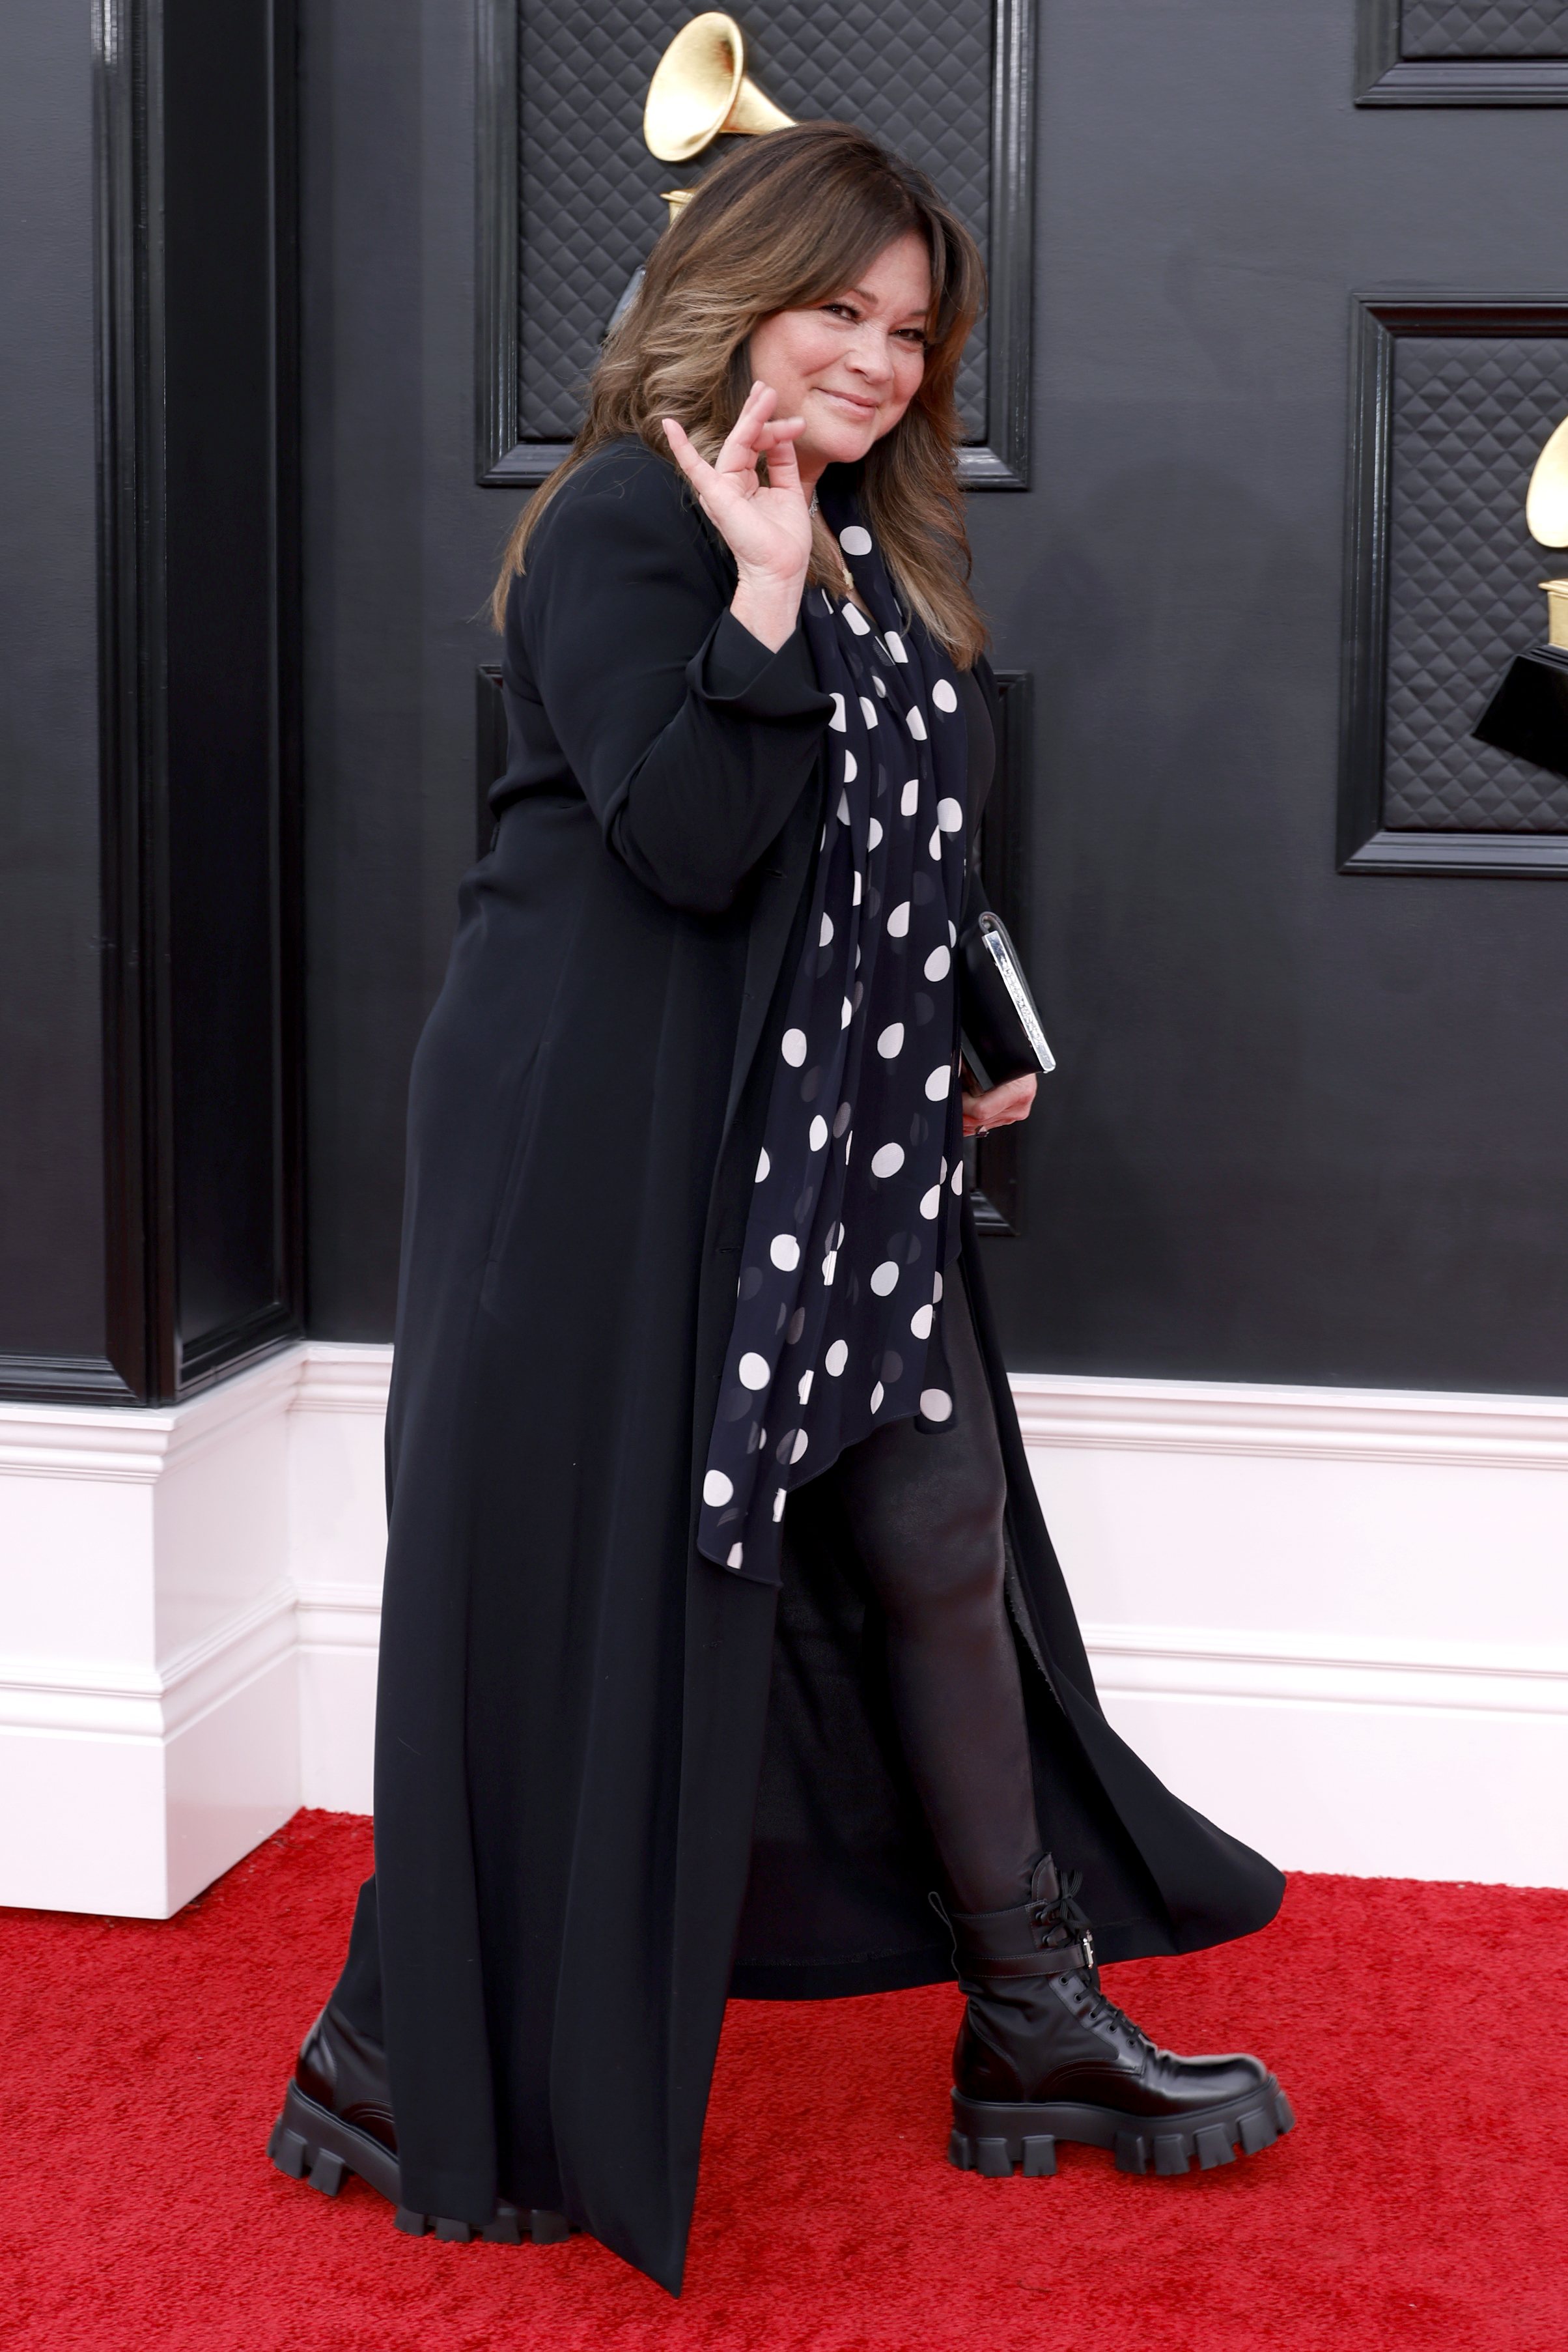 Valerie Bertinelli at the 64th Annual GRAMMY Awards in 2022 | Source: Getty Images